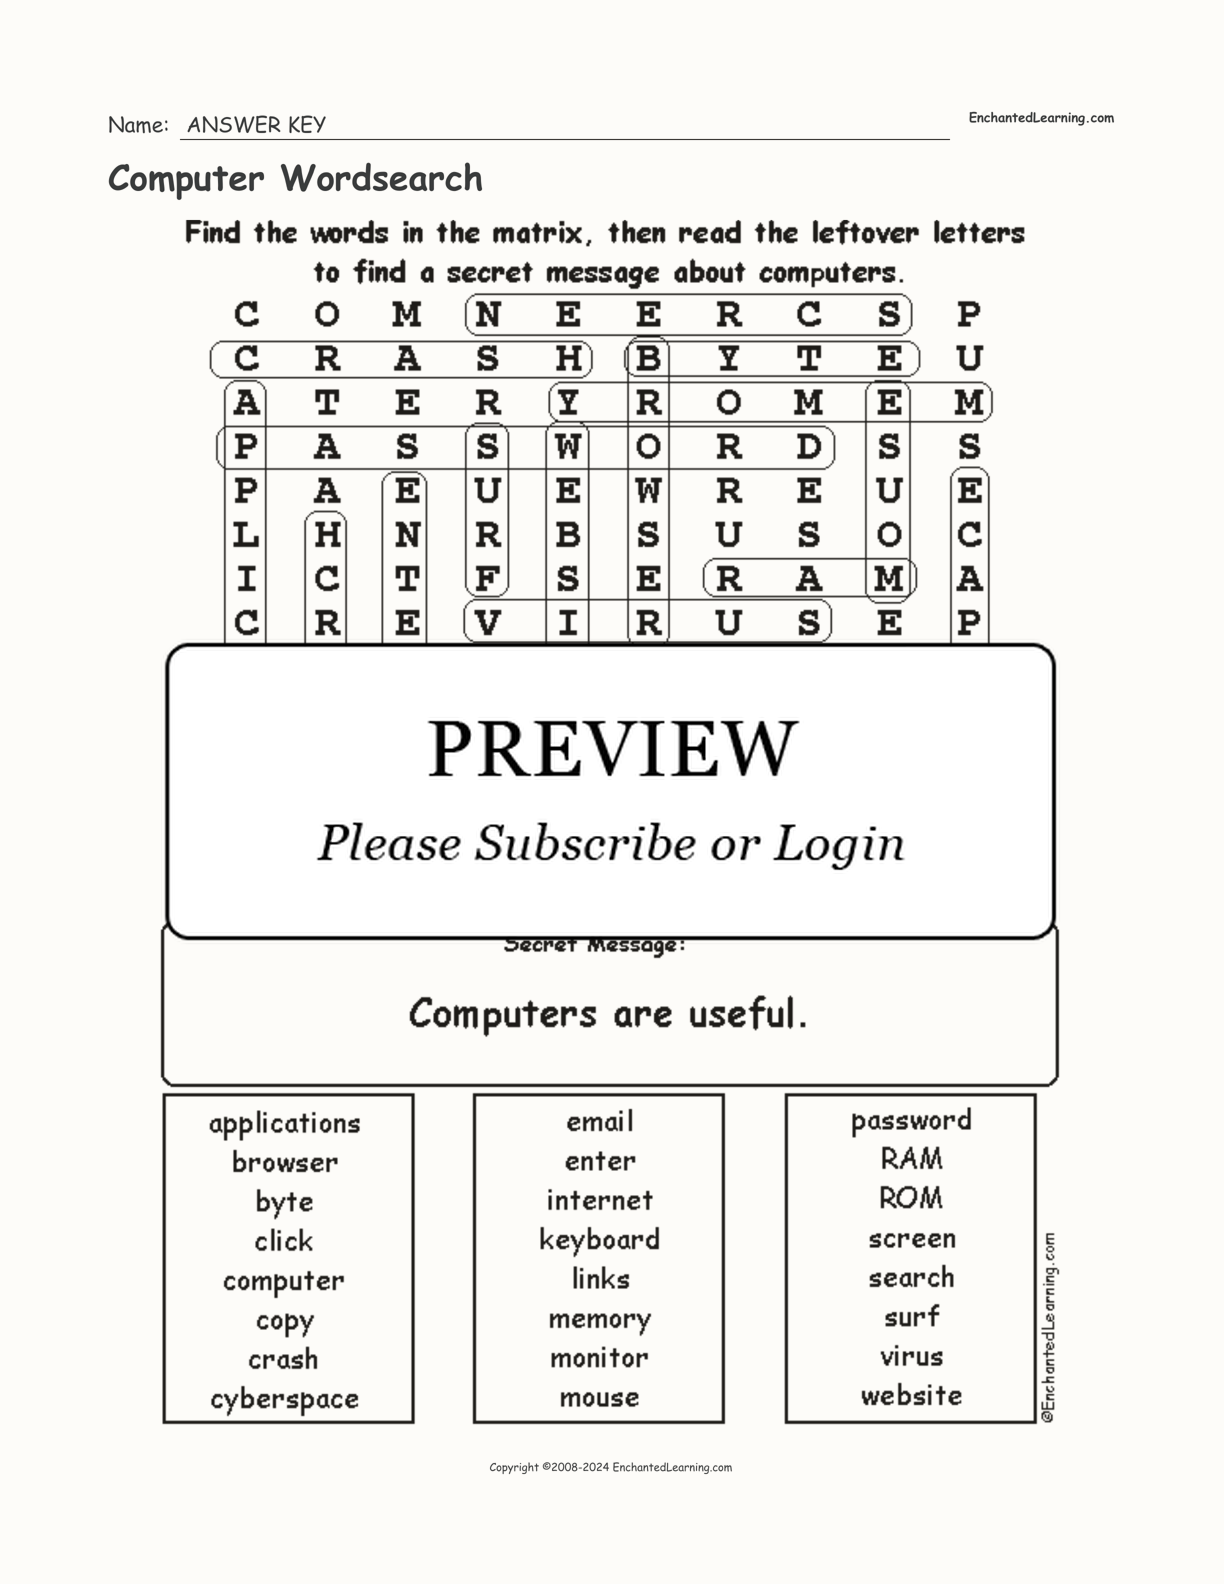 Computer Wordsearch interactive worksheet page 2